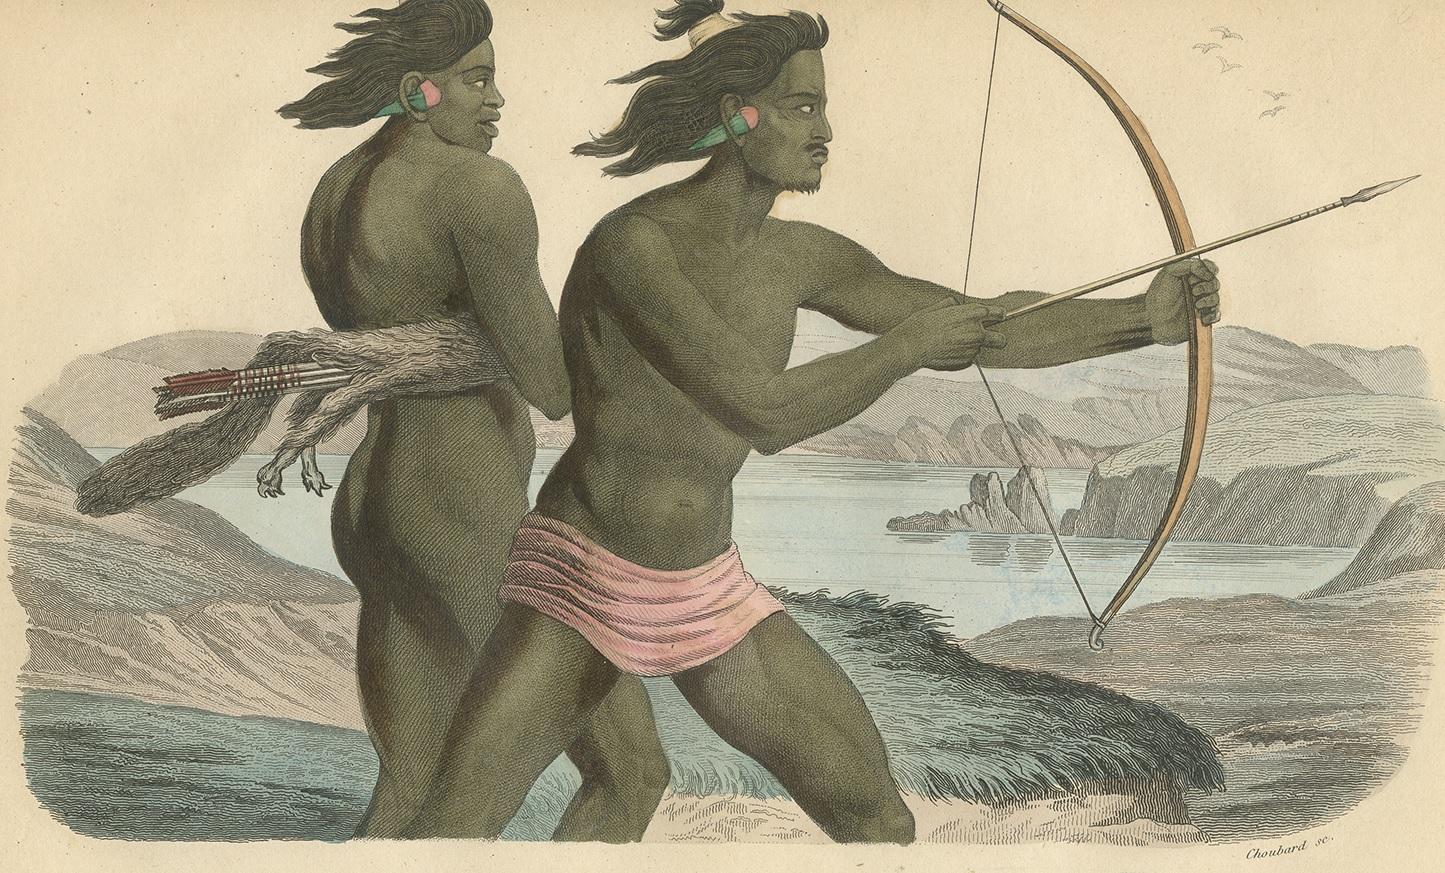 Antique print titled 'Indigènes du Port de San Francisco'. Lithograph of California Indians.The indigenous peoples of California (known as Native Californians) are the indigenous inhabitants who have lived or currently live in the geographic area